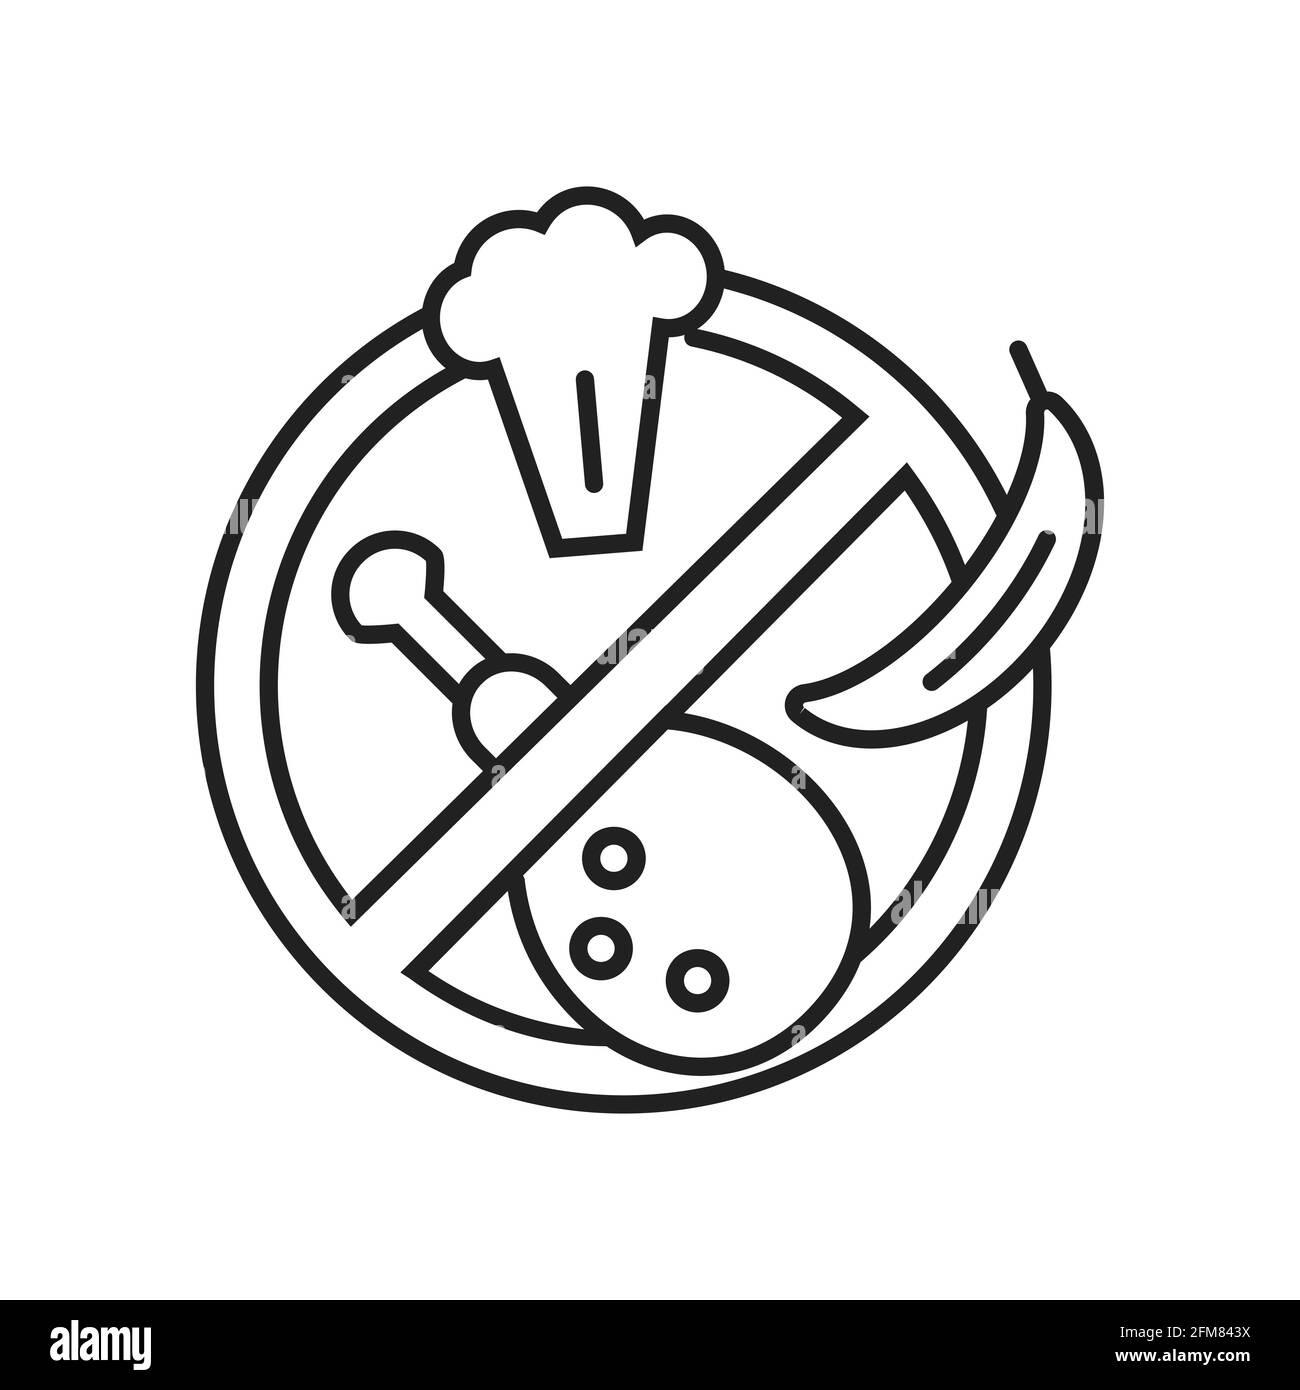 Stop food , no eating icon vector in line, outline style.Chicken leg grill, banana, broccoli are shown. Fast month. Stock Vector